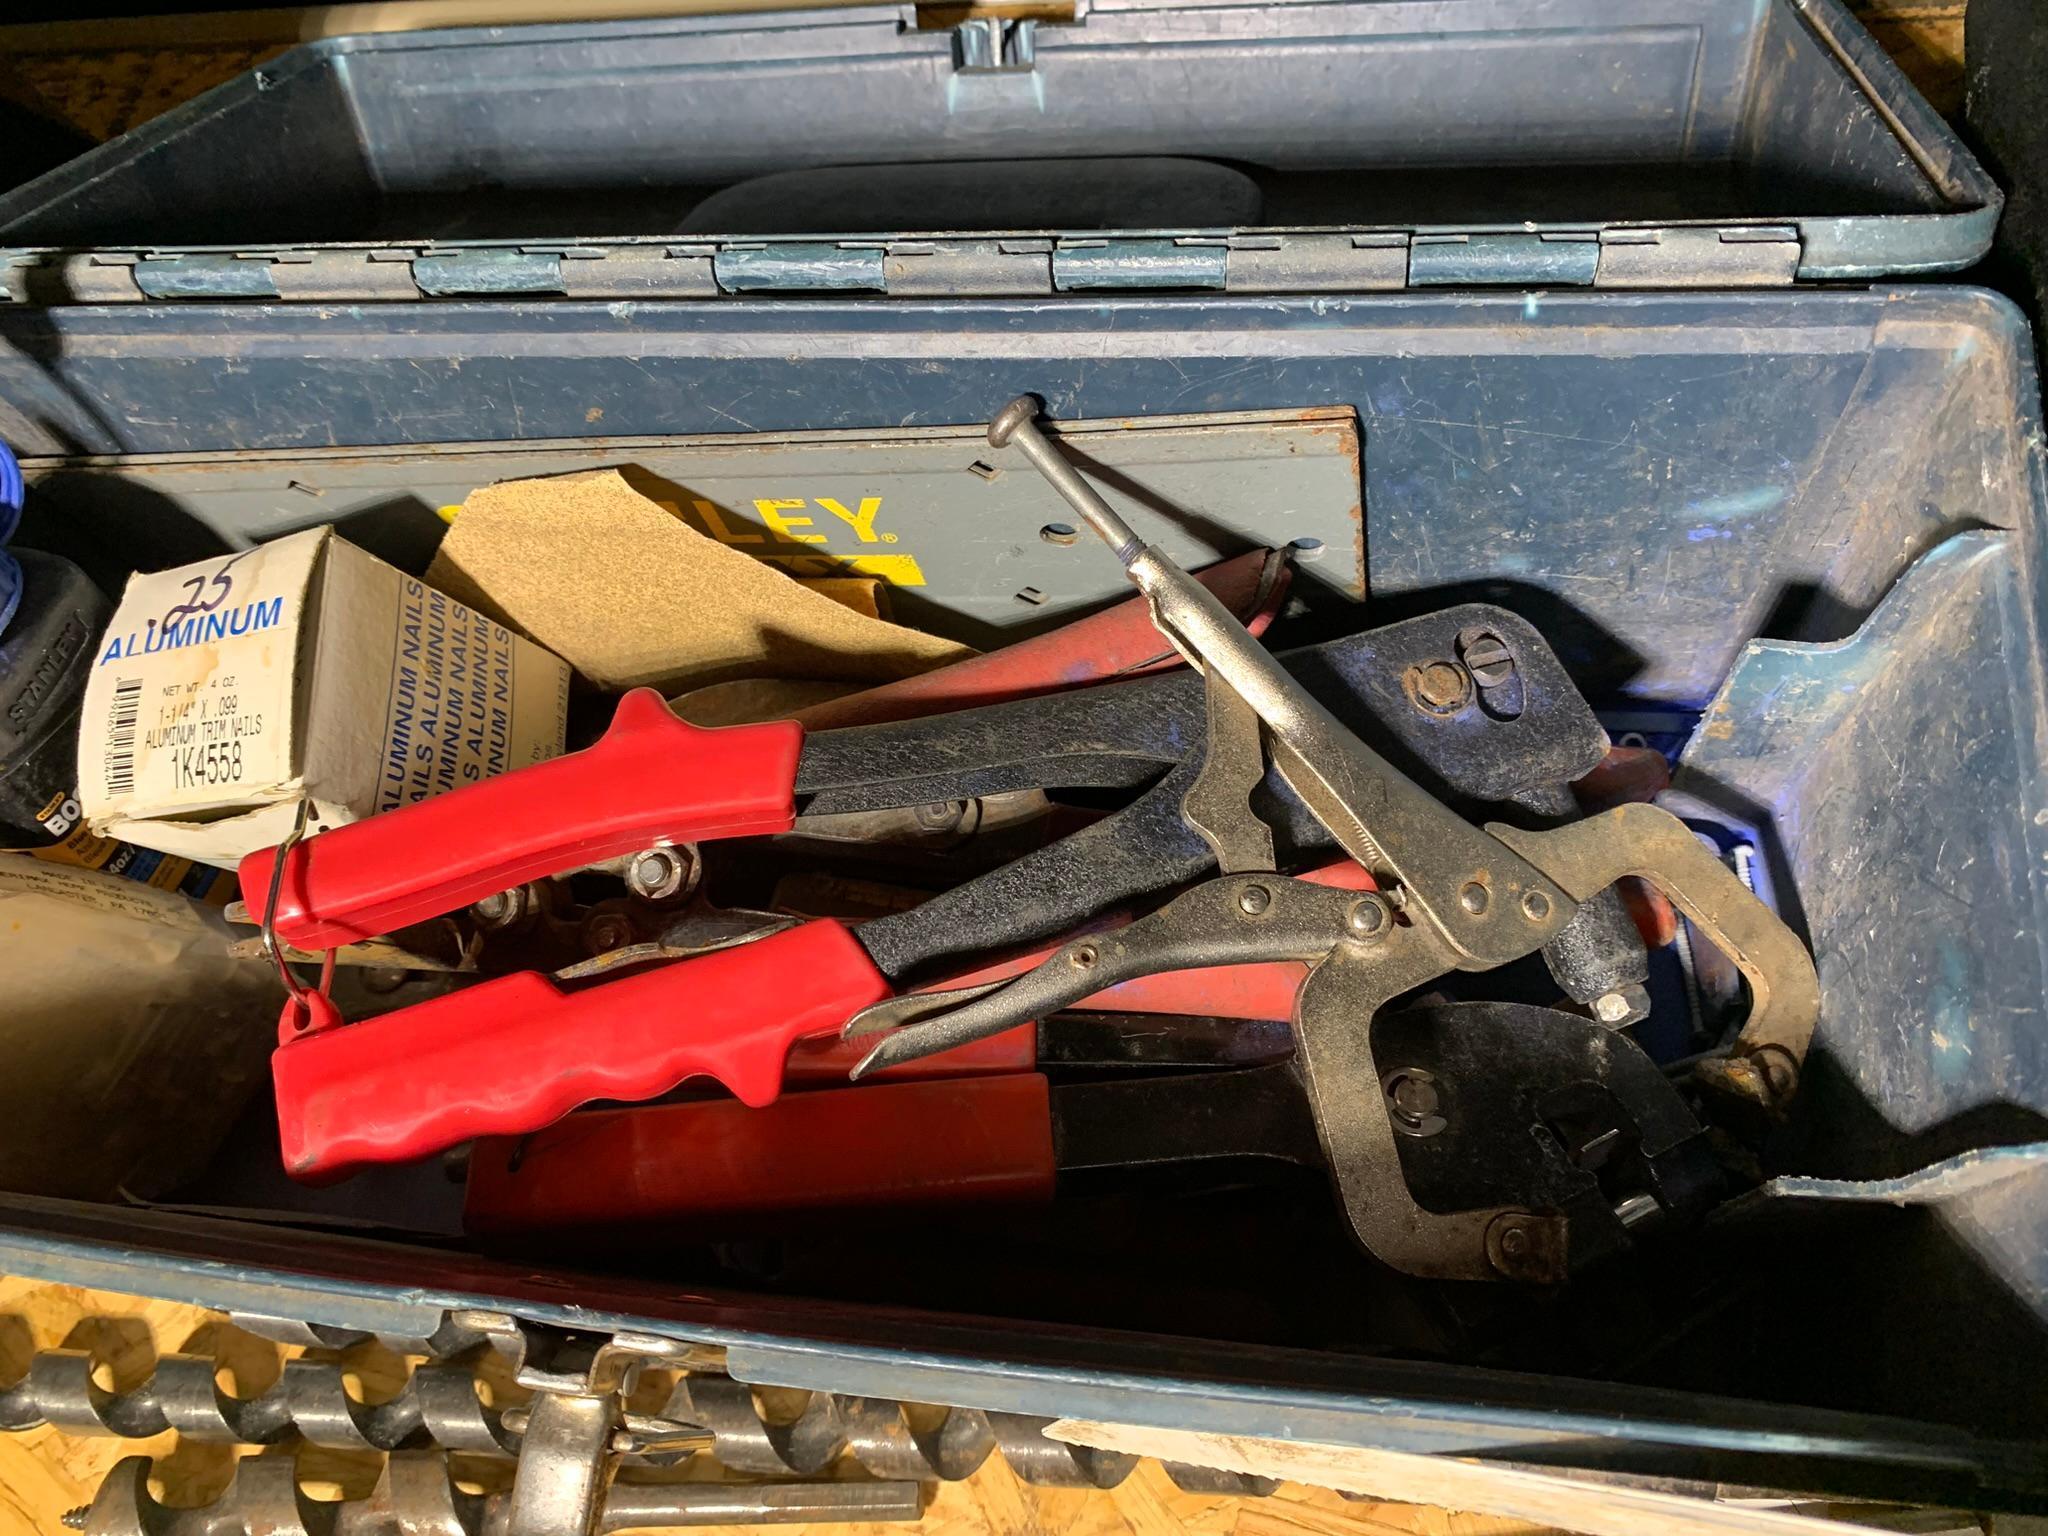 Large Group of Tools - Craftsman Tool Kit, Reciprocating Saw, Assorted Drill Bits, Screwdrivers &